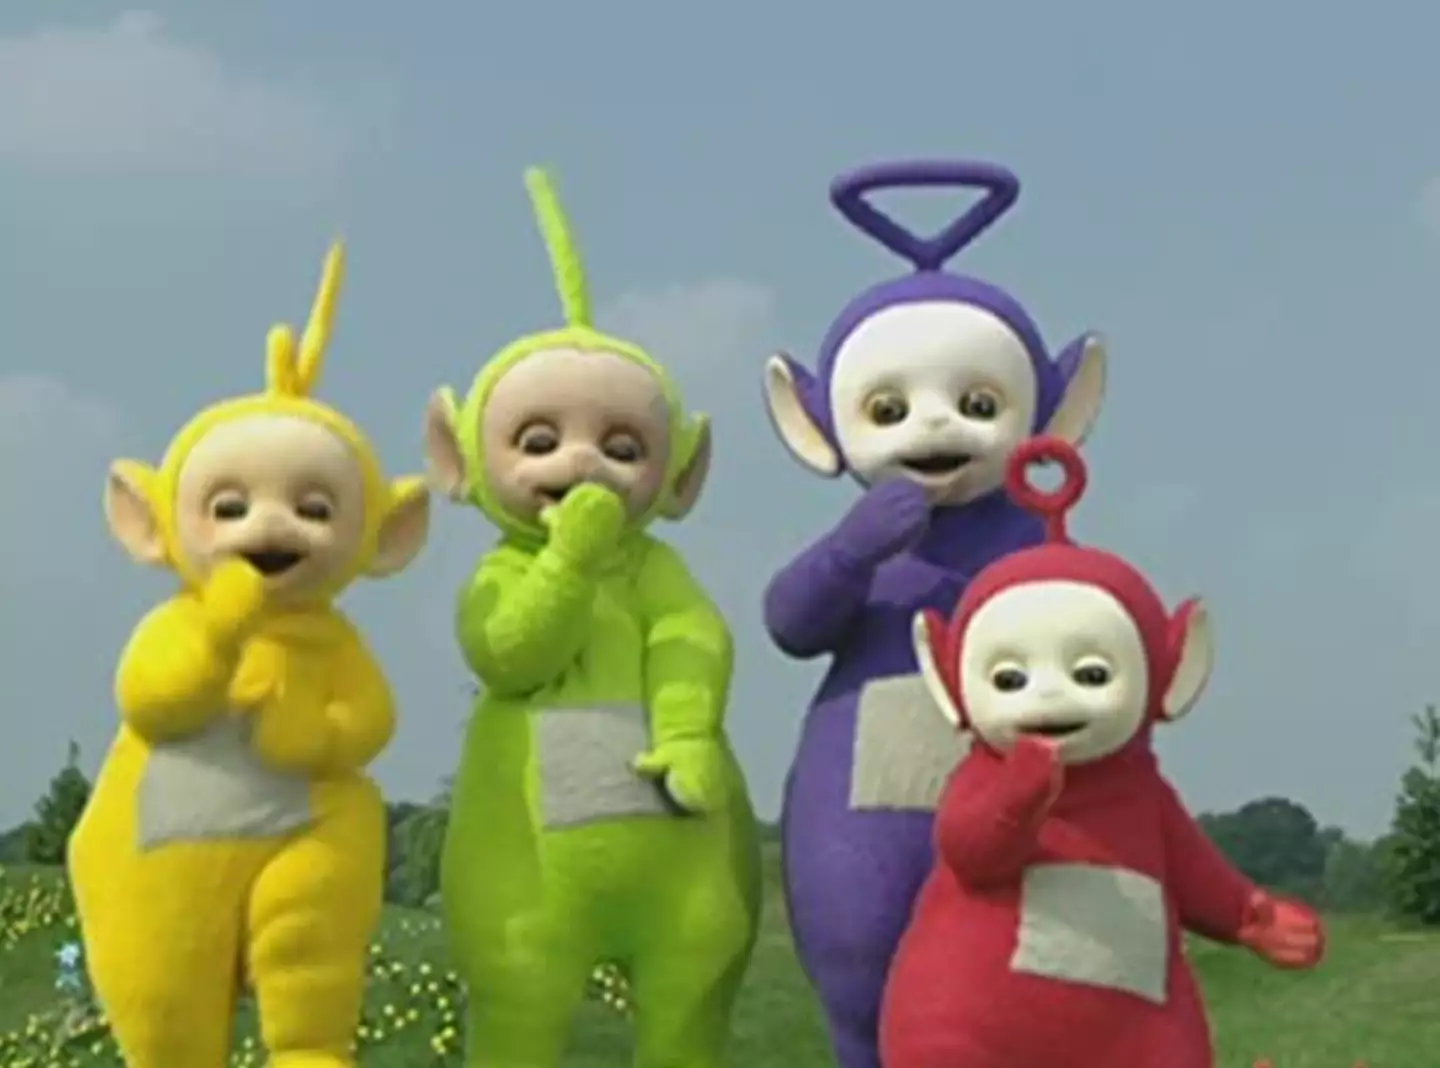 Teletubbies went on to have over 400 episodes.